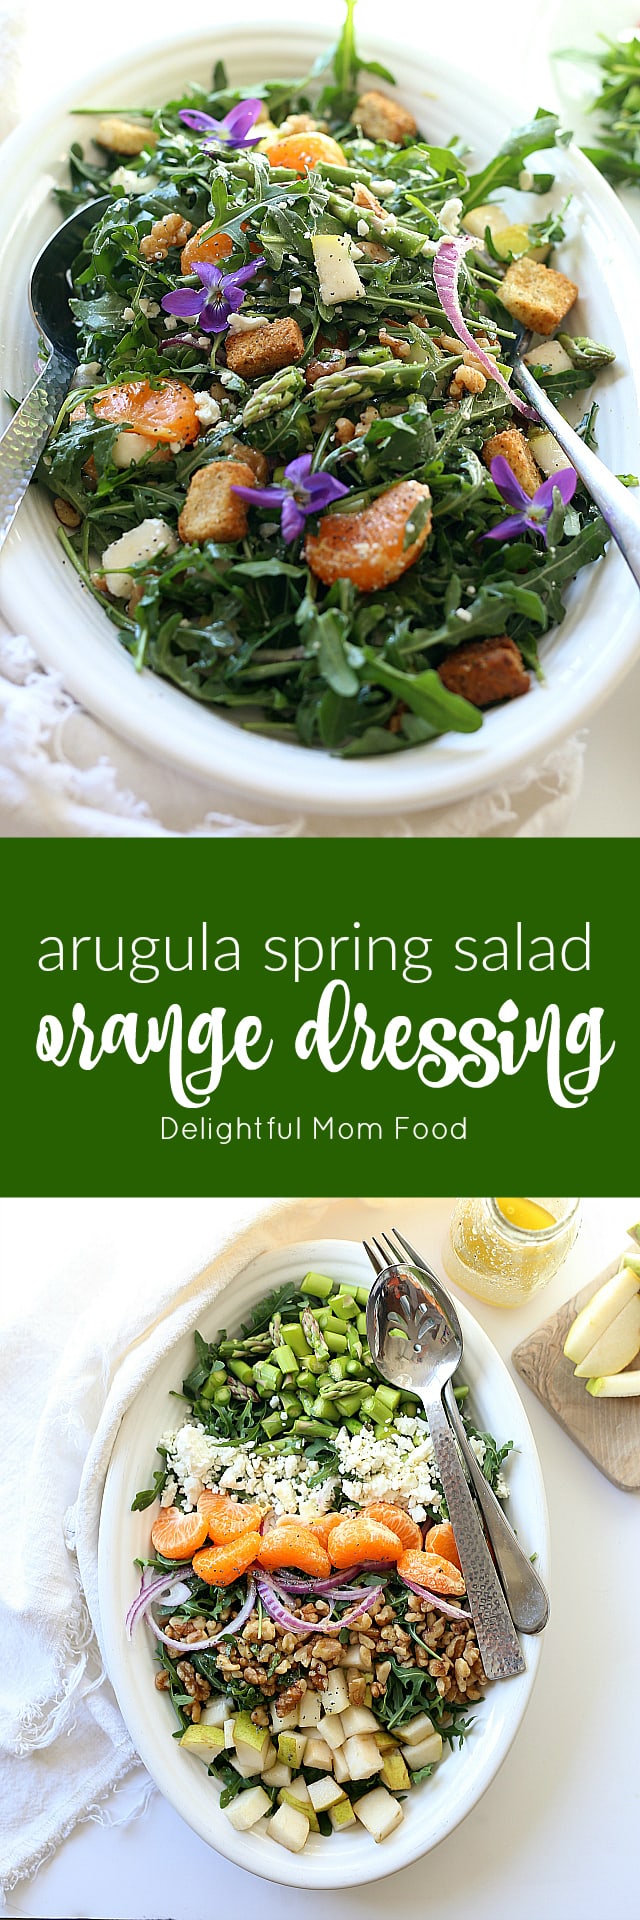 The lightest most satisfying vegetarian arugula salad packed with rocket (rucola) leaves, meaty walnuts, earthy red onions, hints of feta, nutty asparagus vegetables and topped with a savory sweet mandarin orange salad dressing. Perfect for a spring brunch or dinner especially when the evenings are lighter longer!